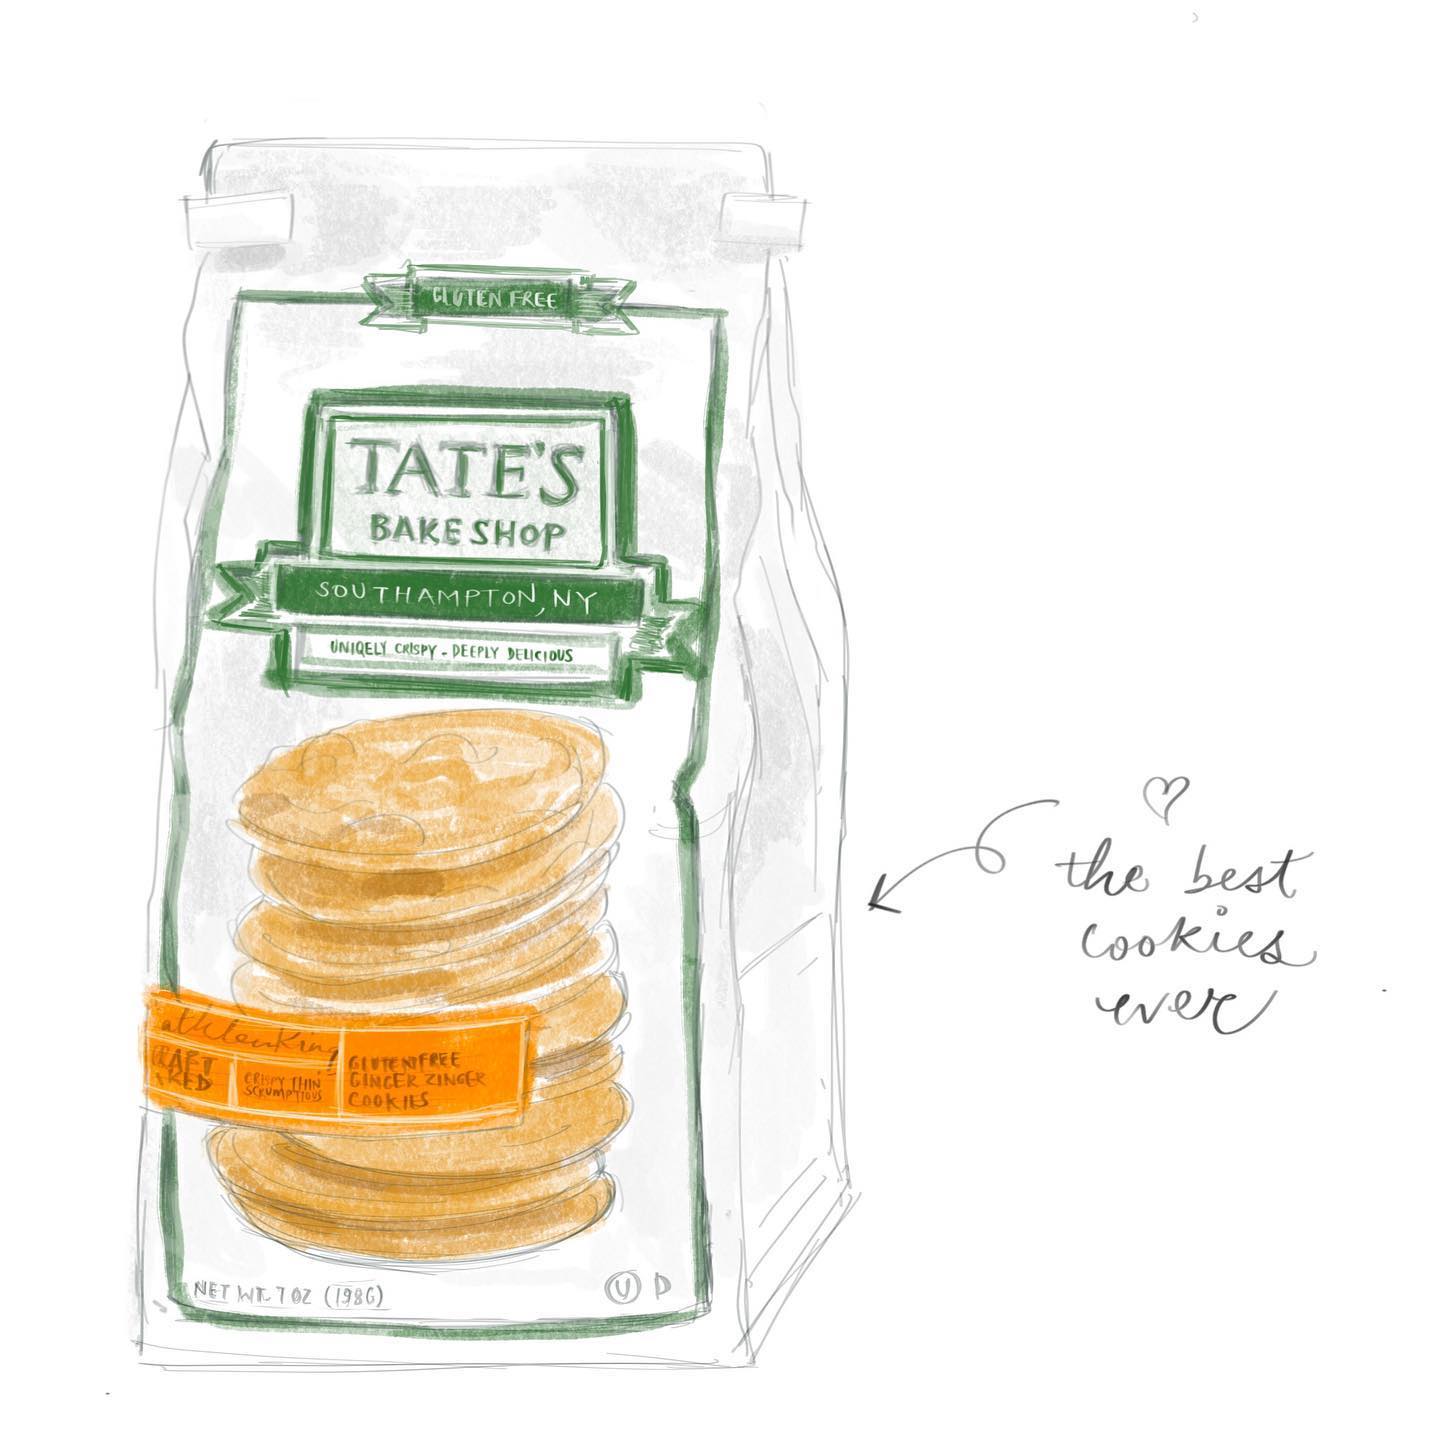 Tried these for the first time, @tatesbakeshop the best cookies ever!